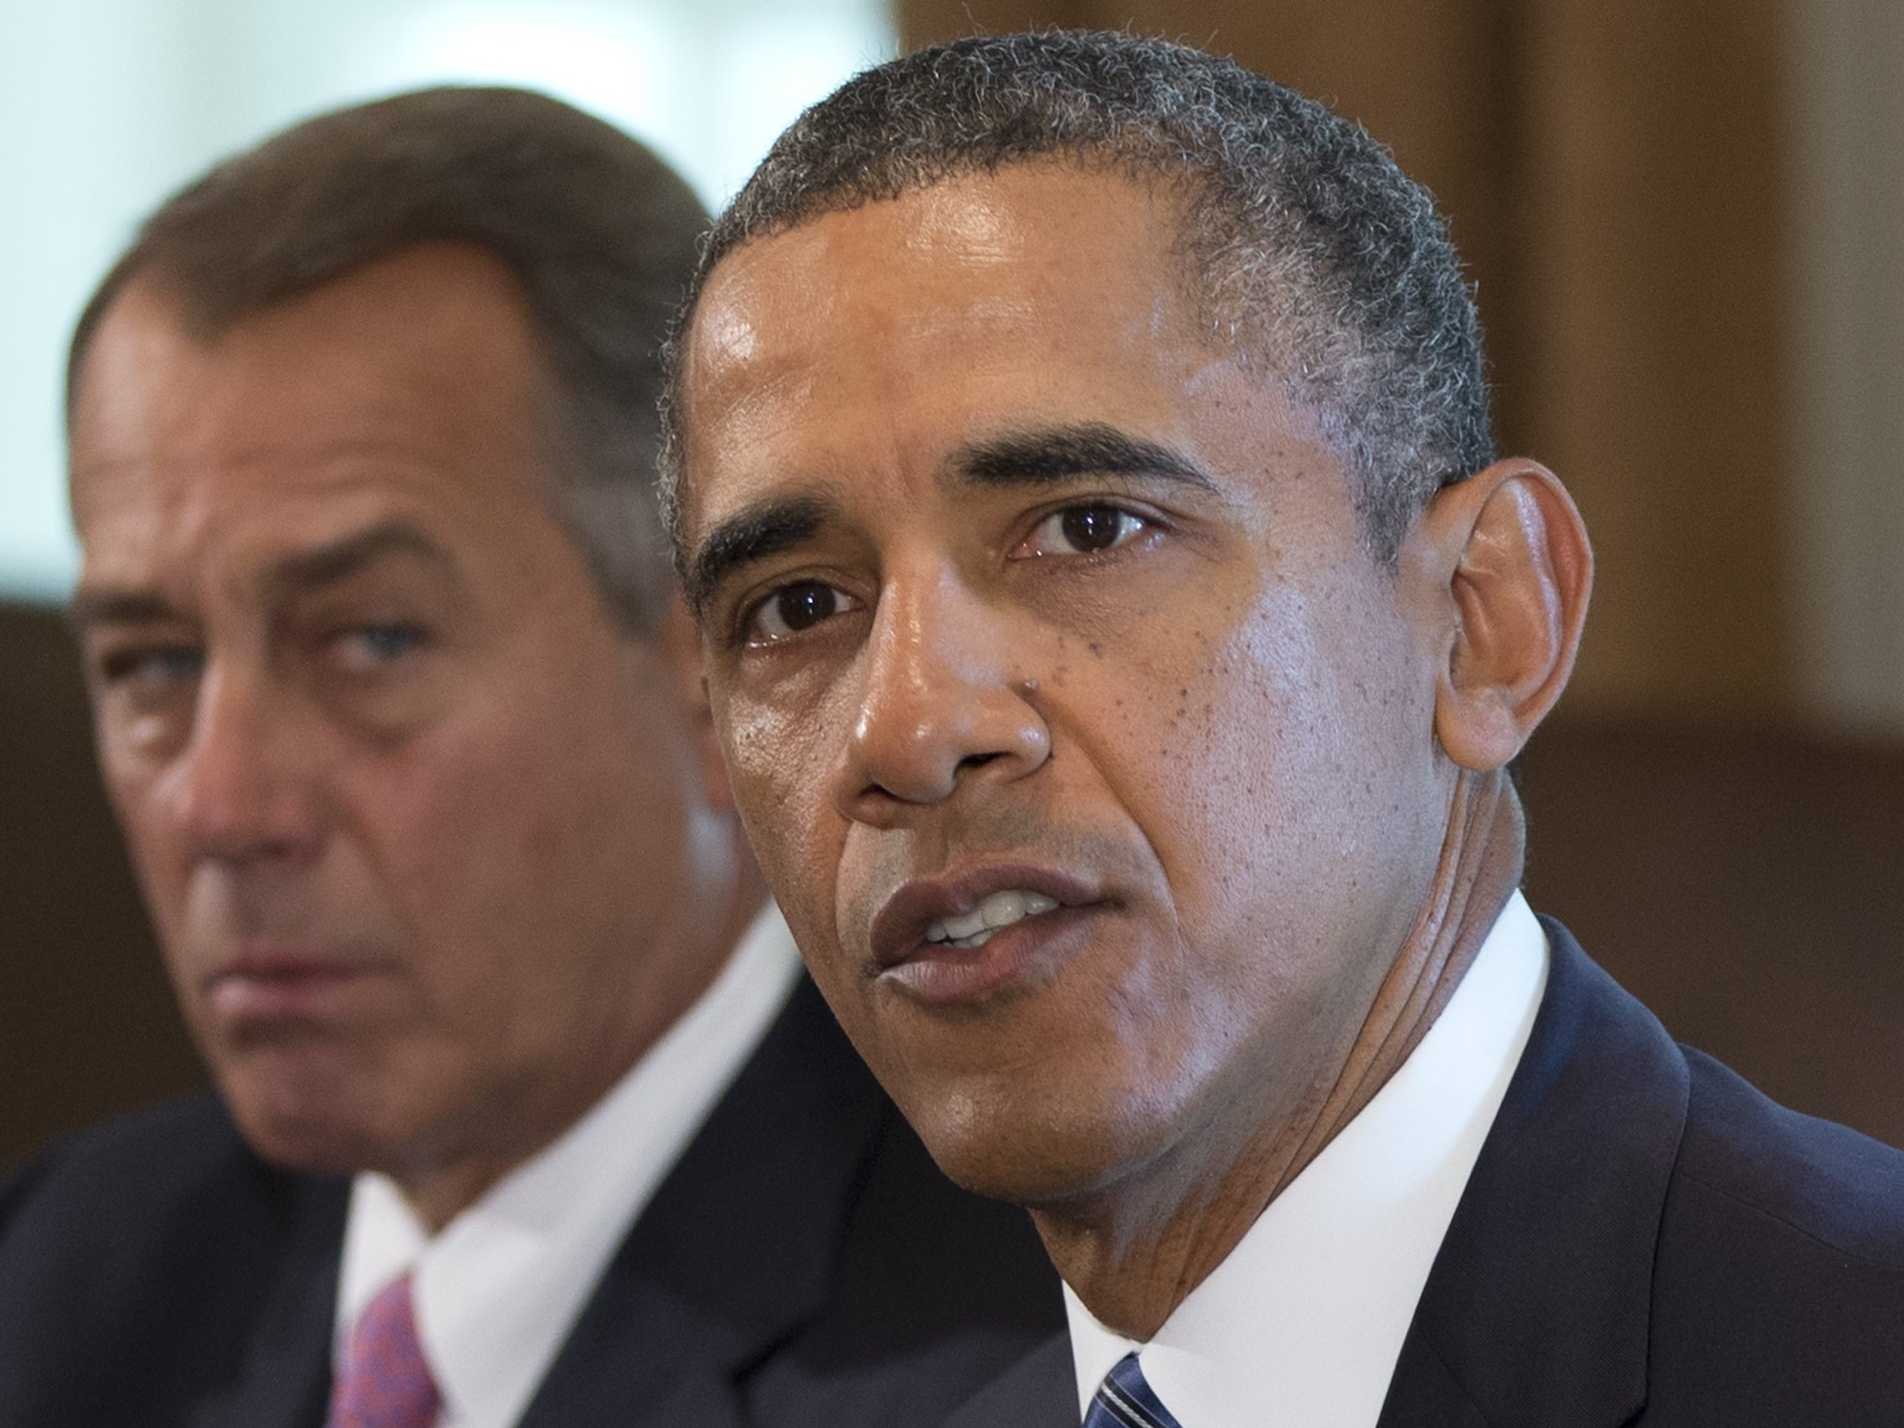 Boehner Heres Why I Have To Sue Obama Now[1]